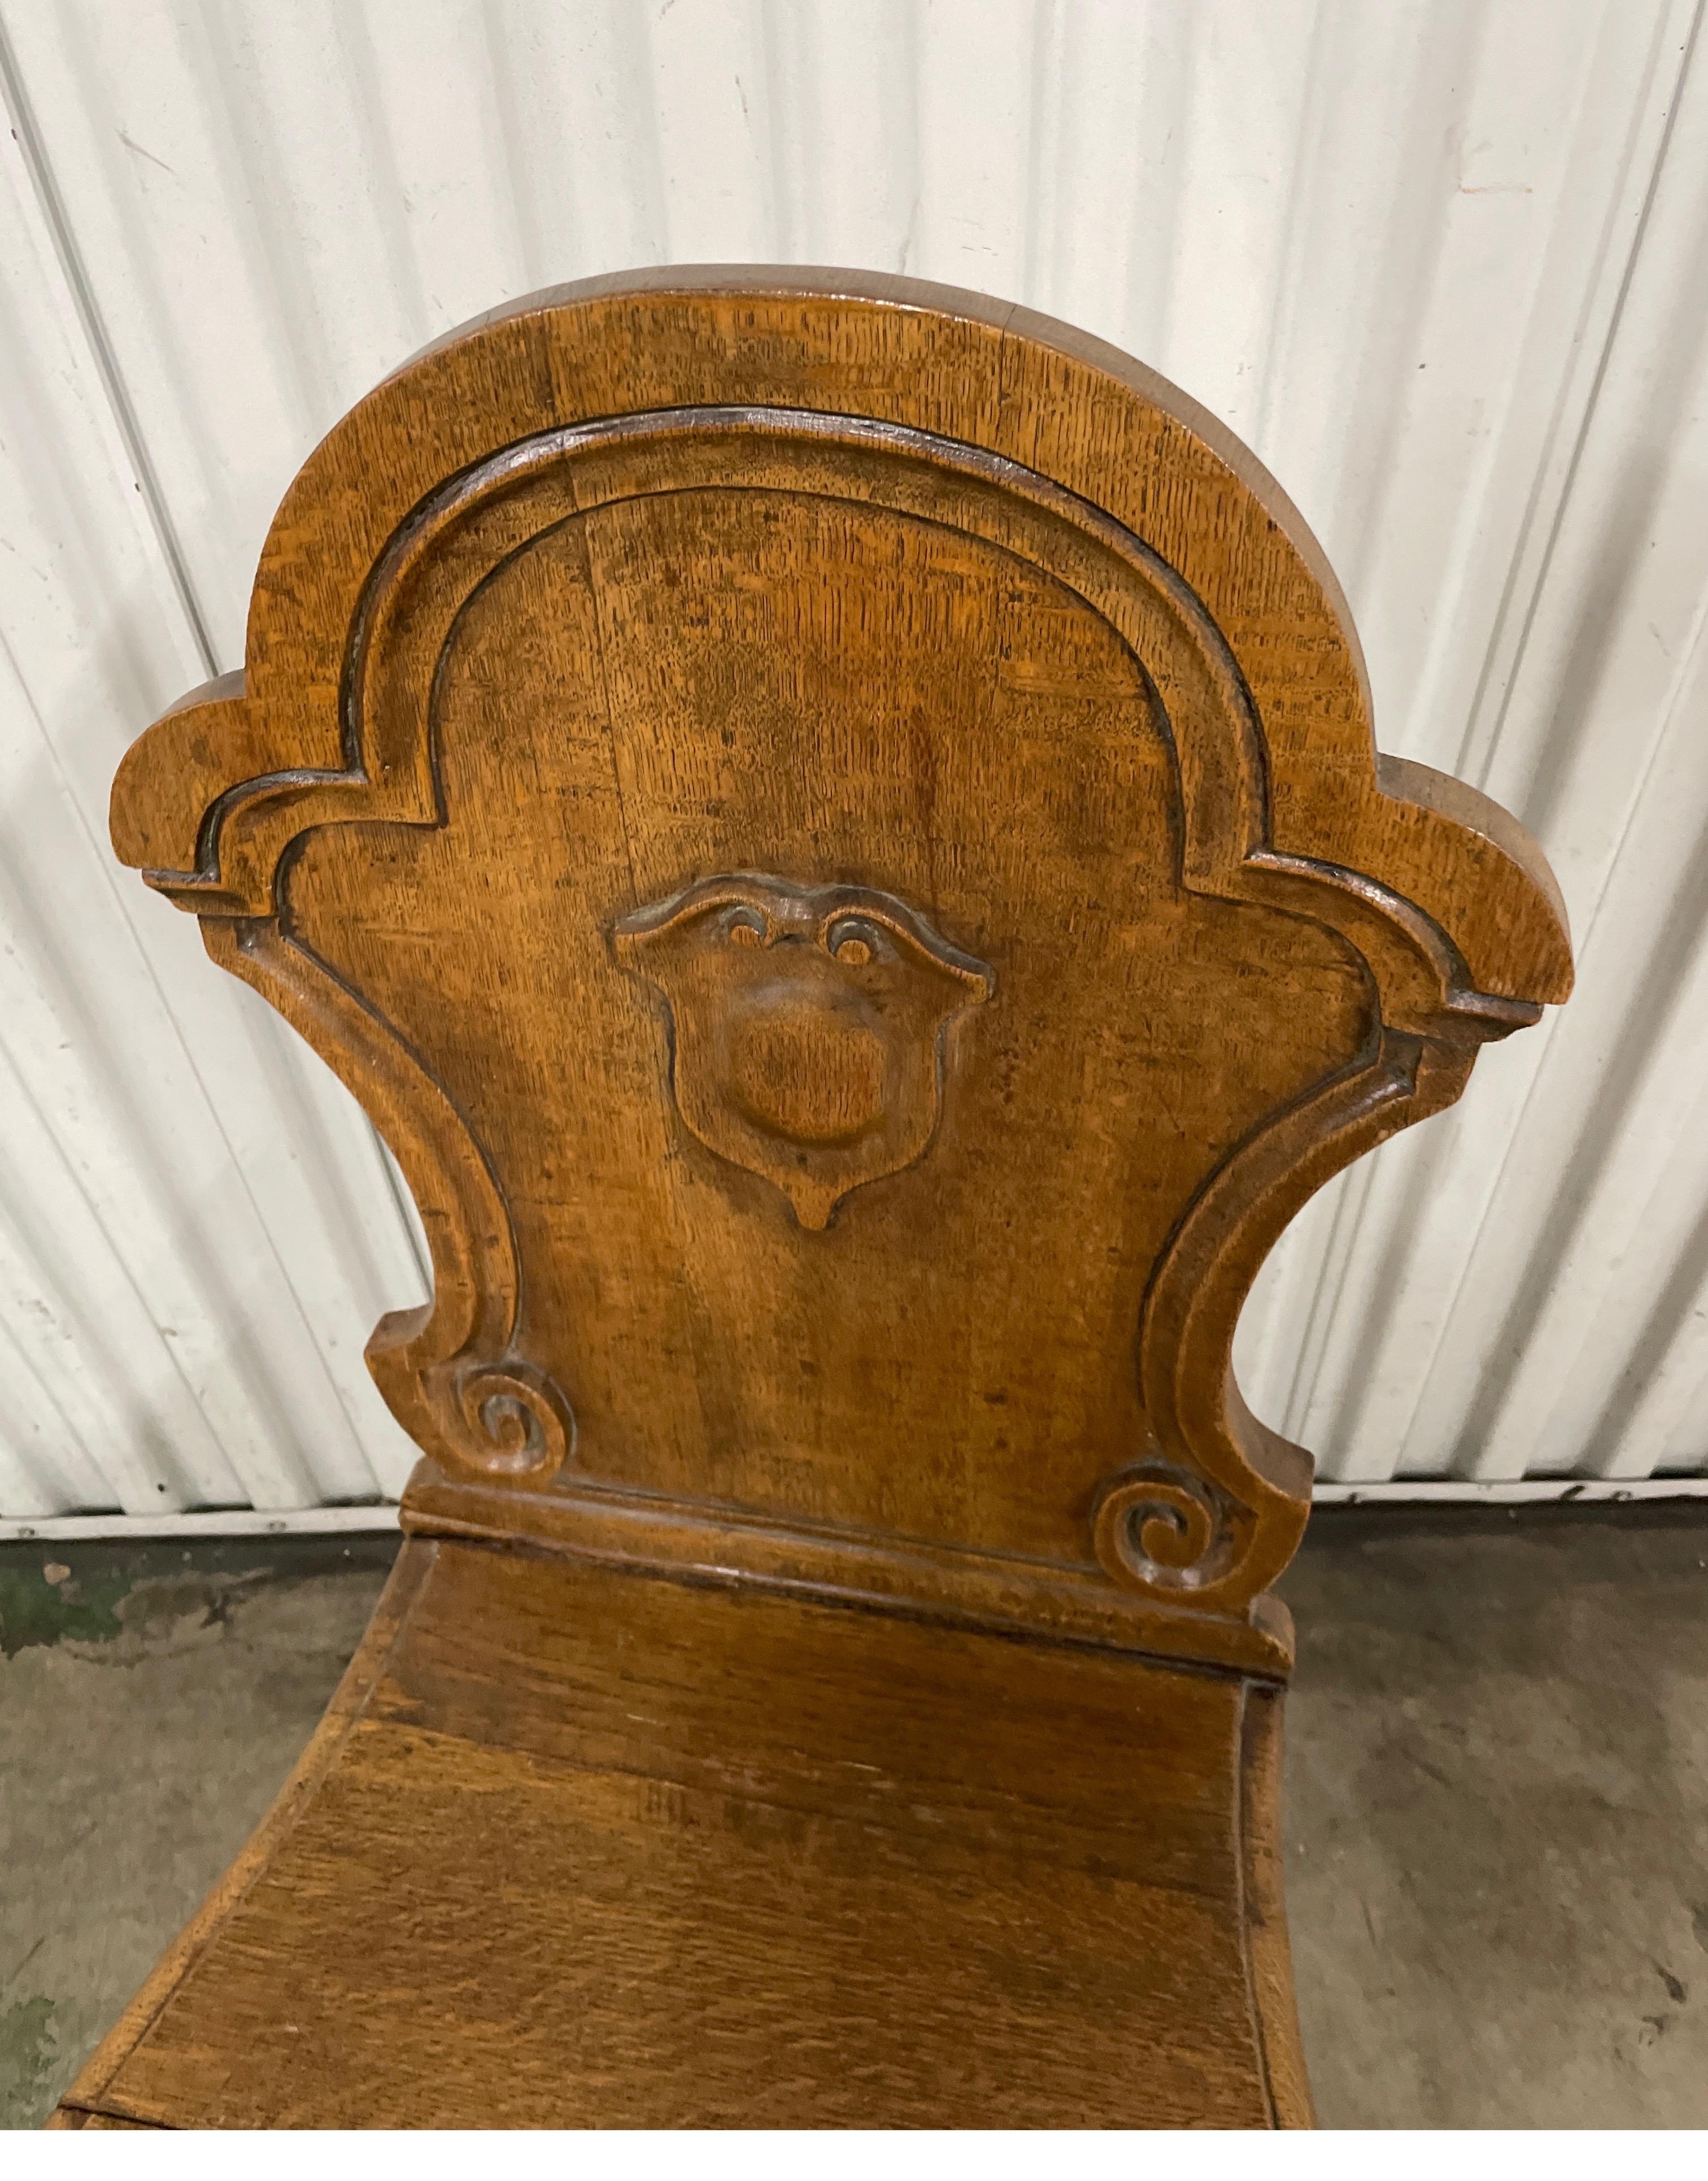 Unusual single carved oak side chair featuring a cartouche detail on the upper back. The two front legs are in the cabriole style. A very unique piece.